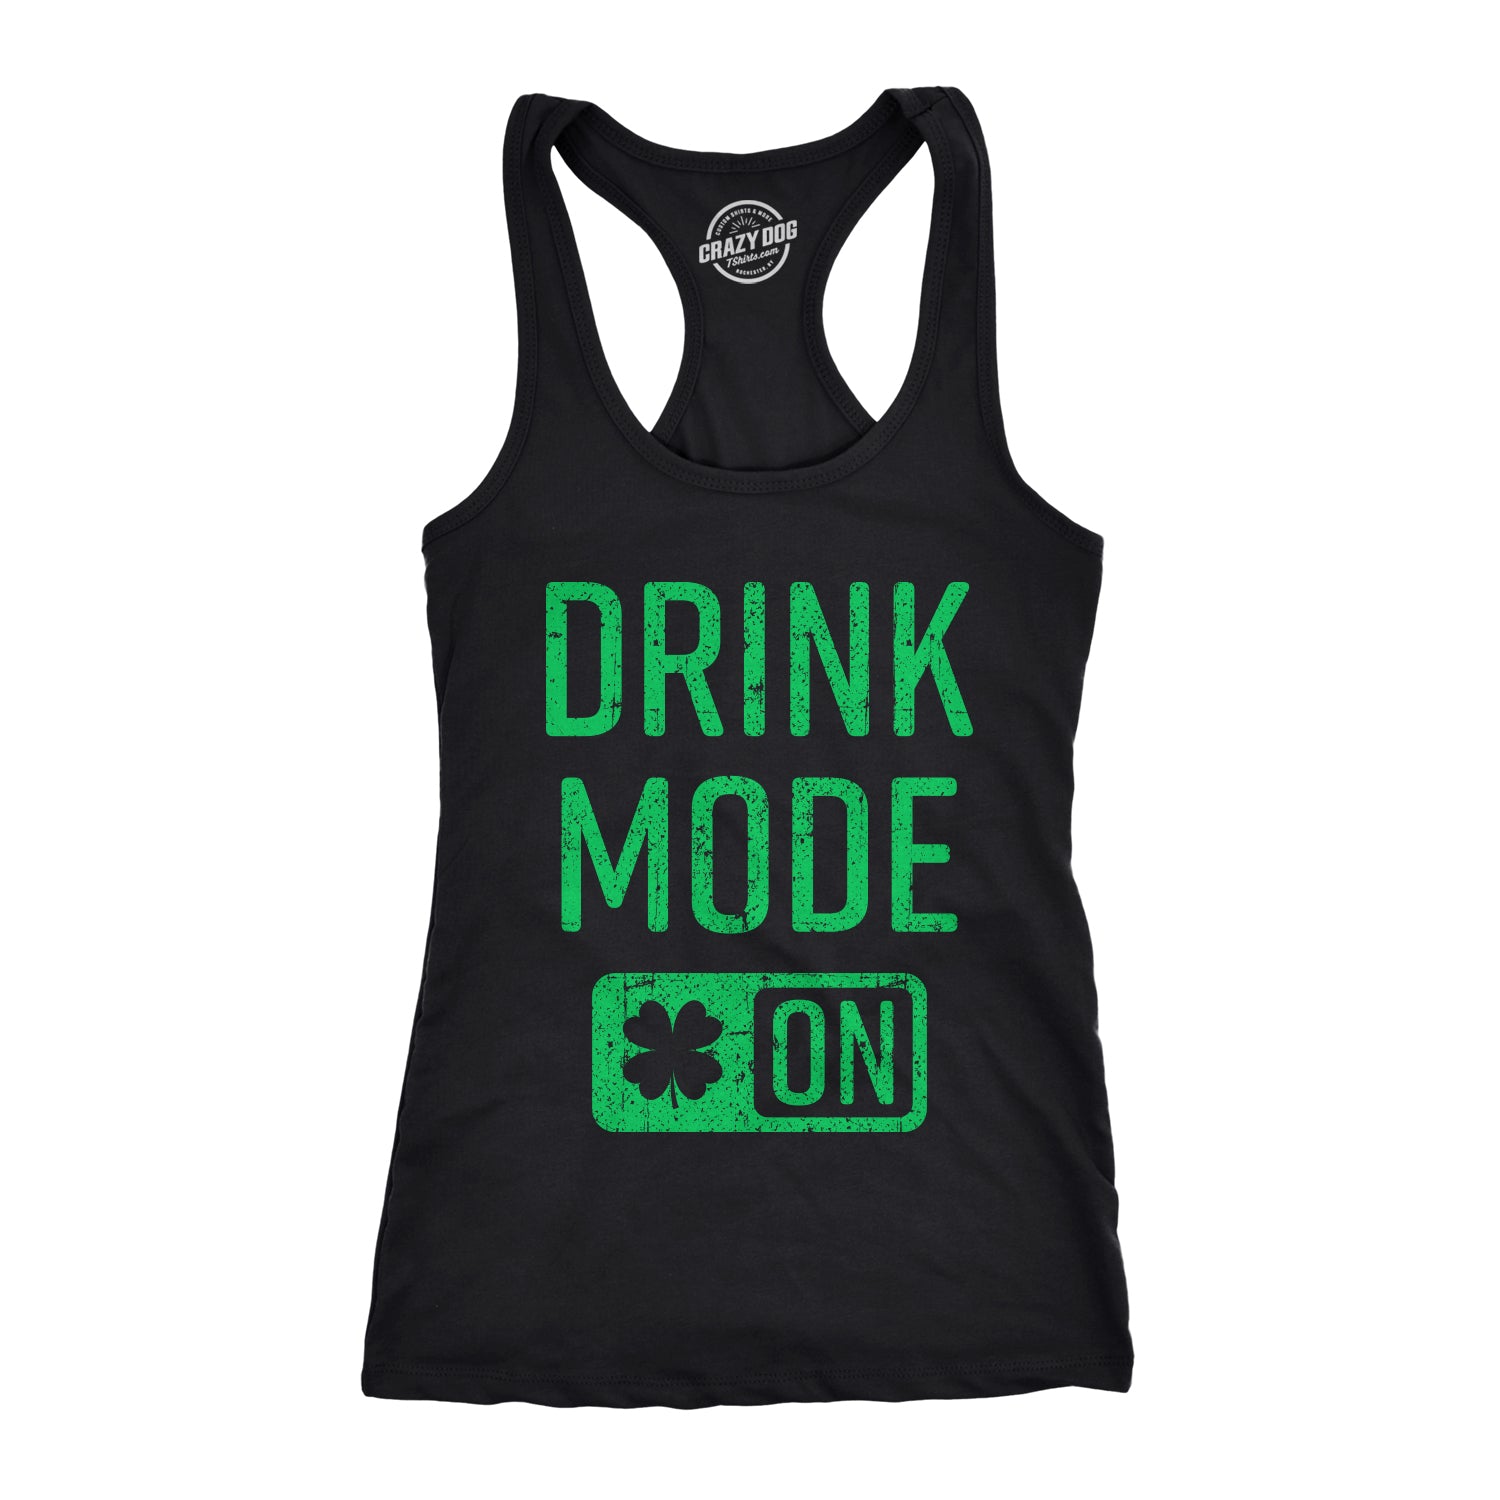 Funny Black Drink Mode On Womens Tank Top Nerdy Saint Patrick's Day Drinking Tee